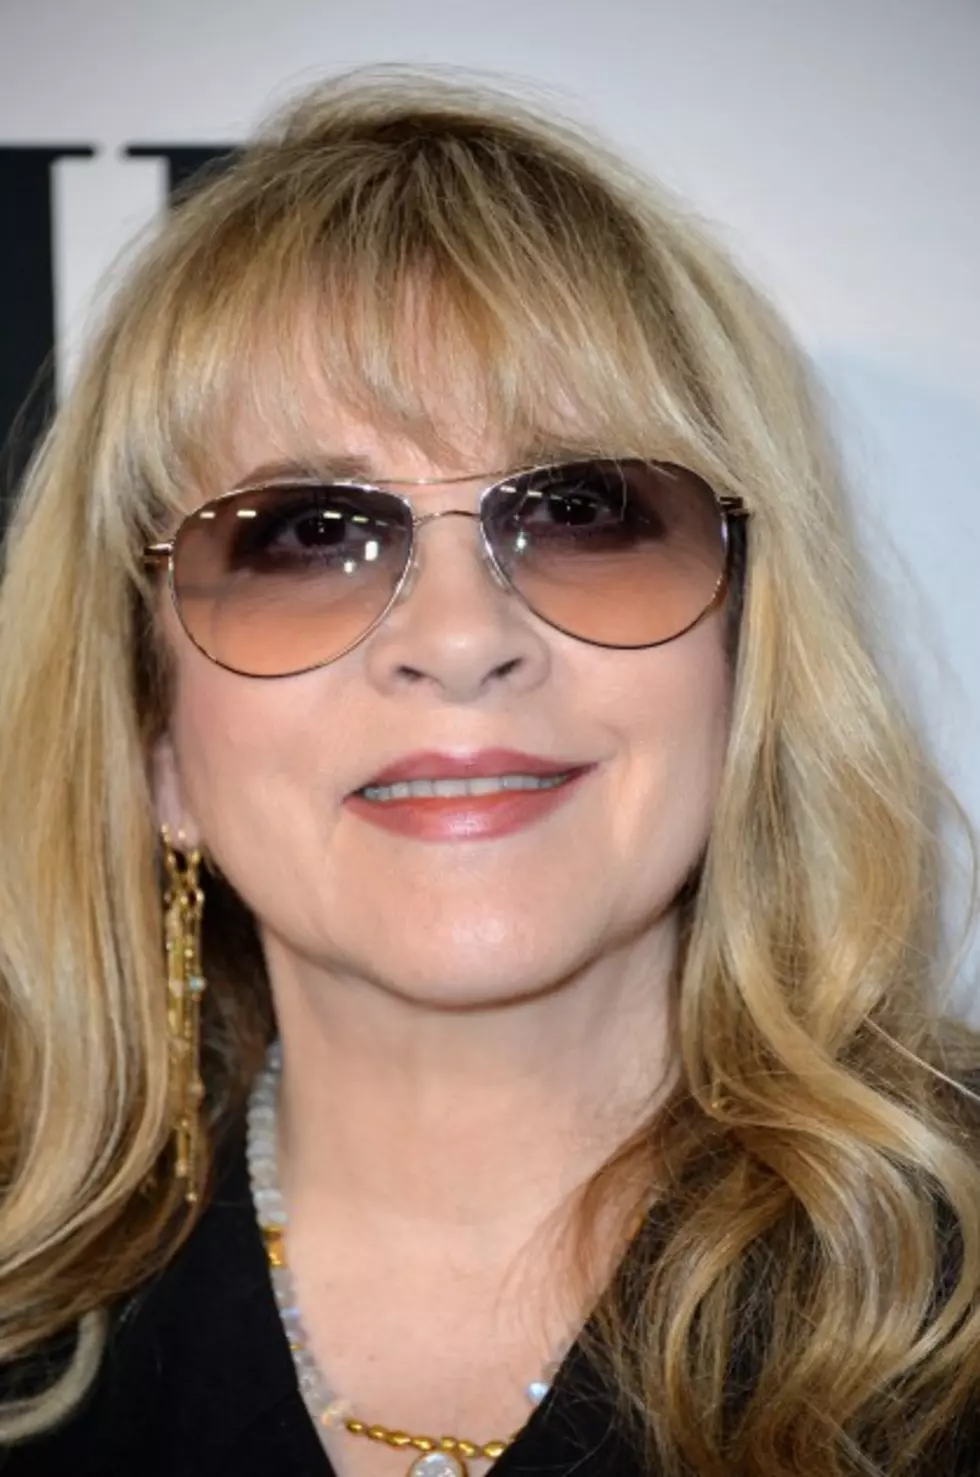 Stevie Nicks Is Very Candid in New Rolling Stone Cover Story